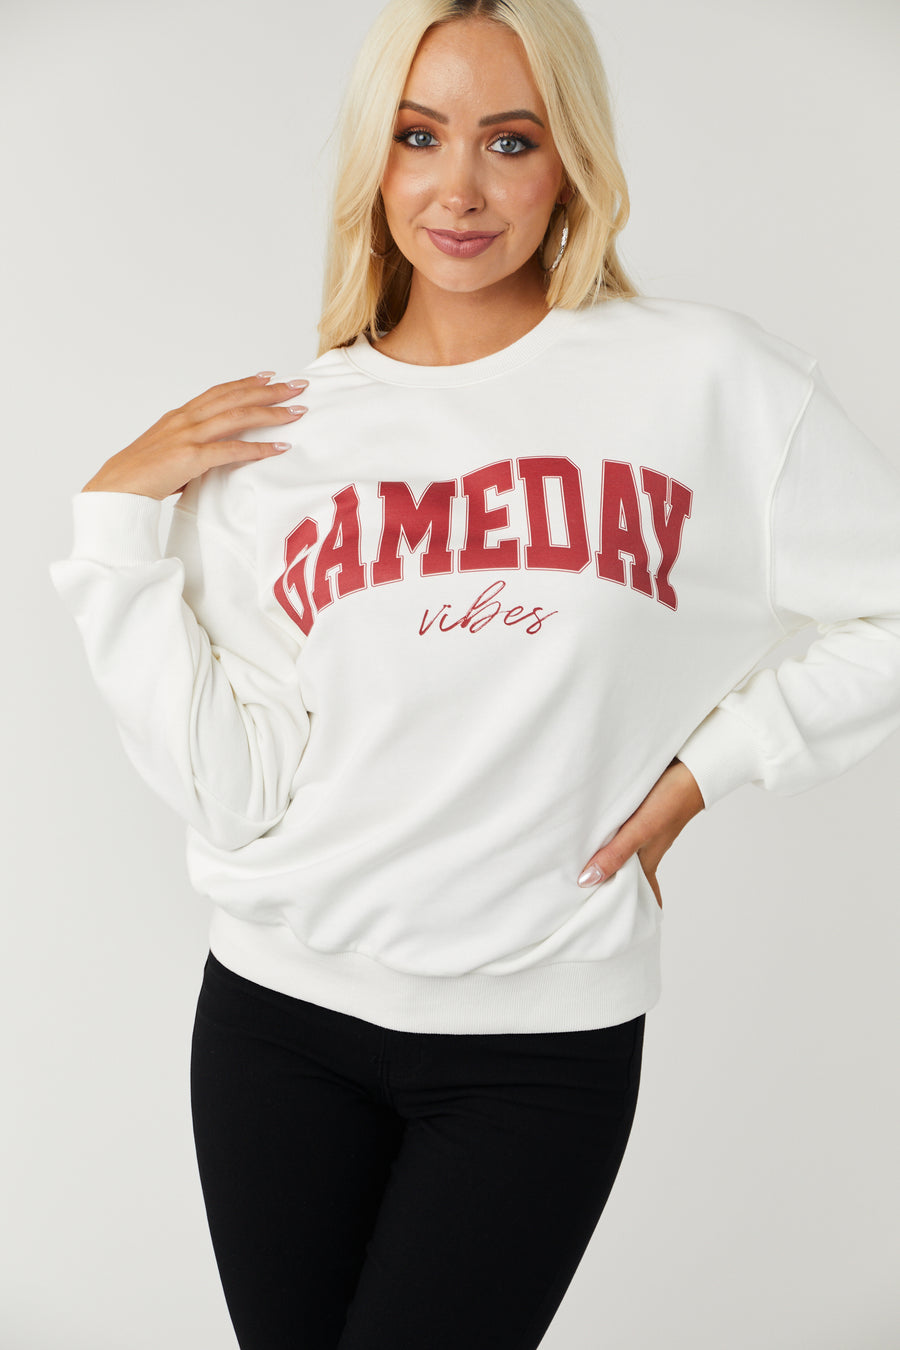 Ivory and Ruby 'GameDay Vibes' Graphic Sweatshirt